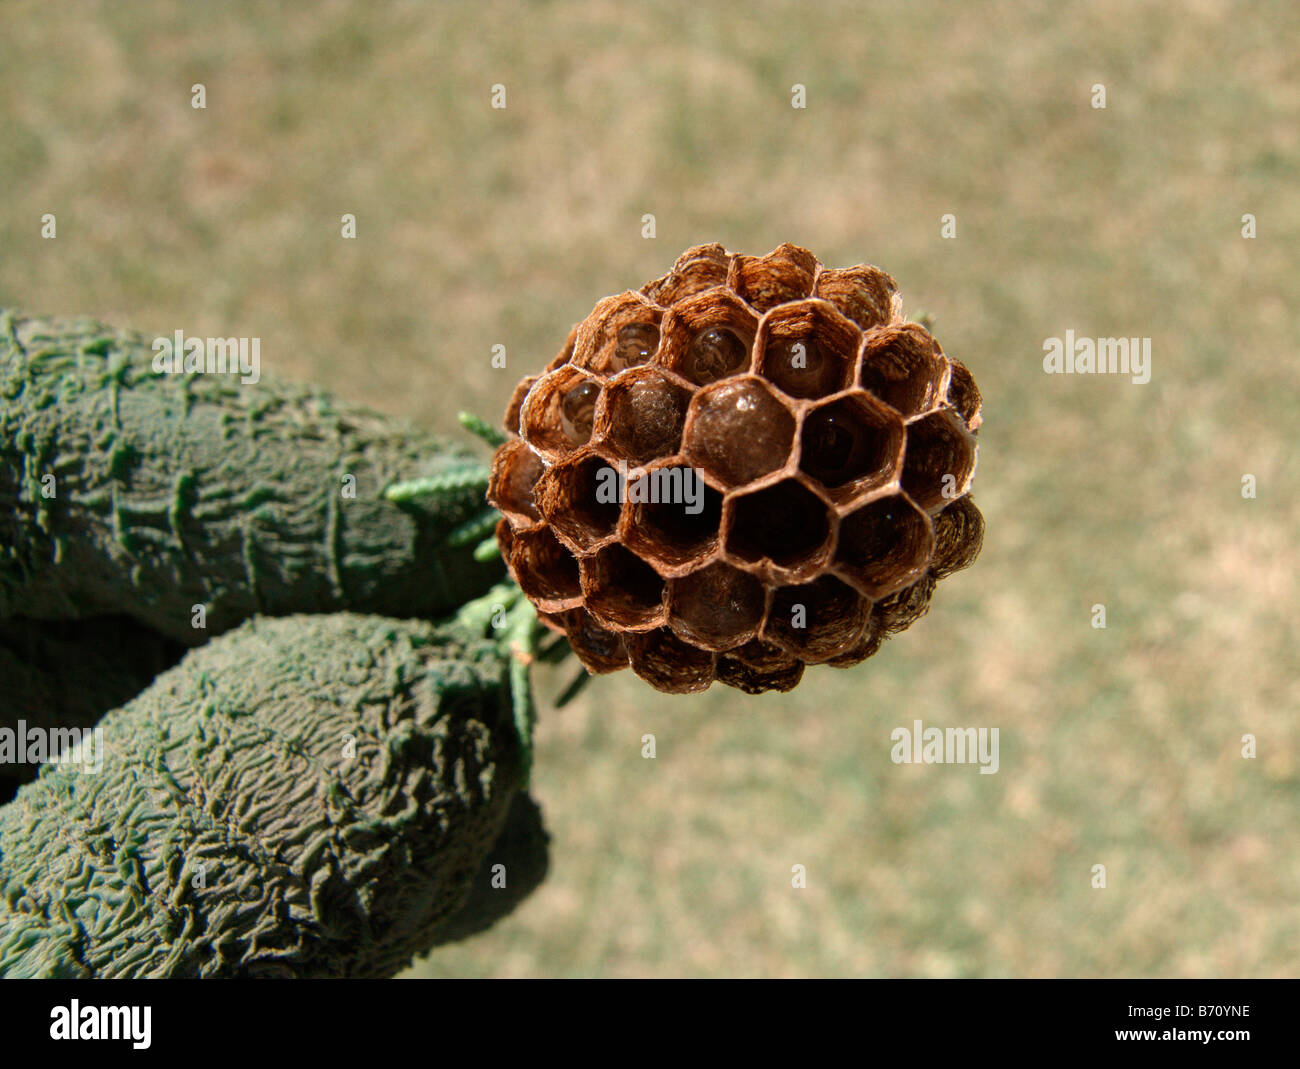 Wasp's larvae inside a little nest Stock Photo